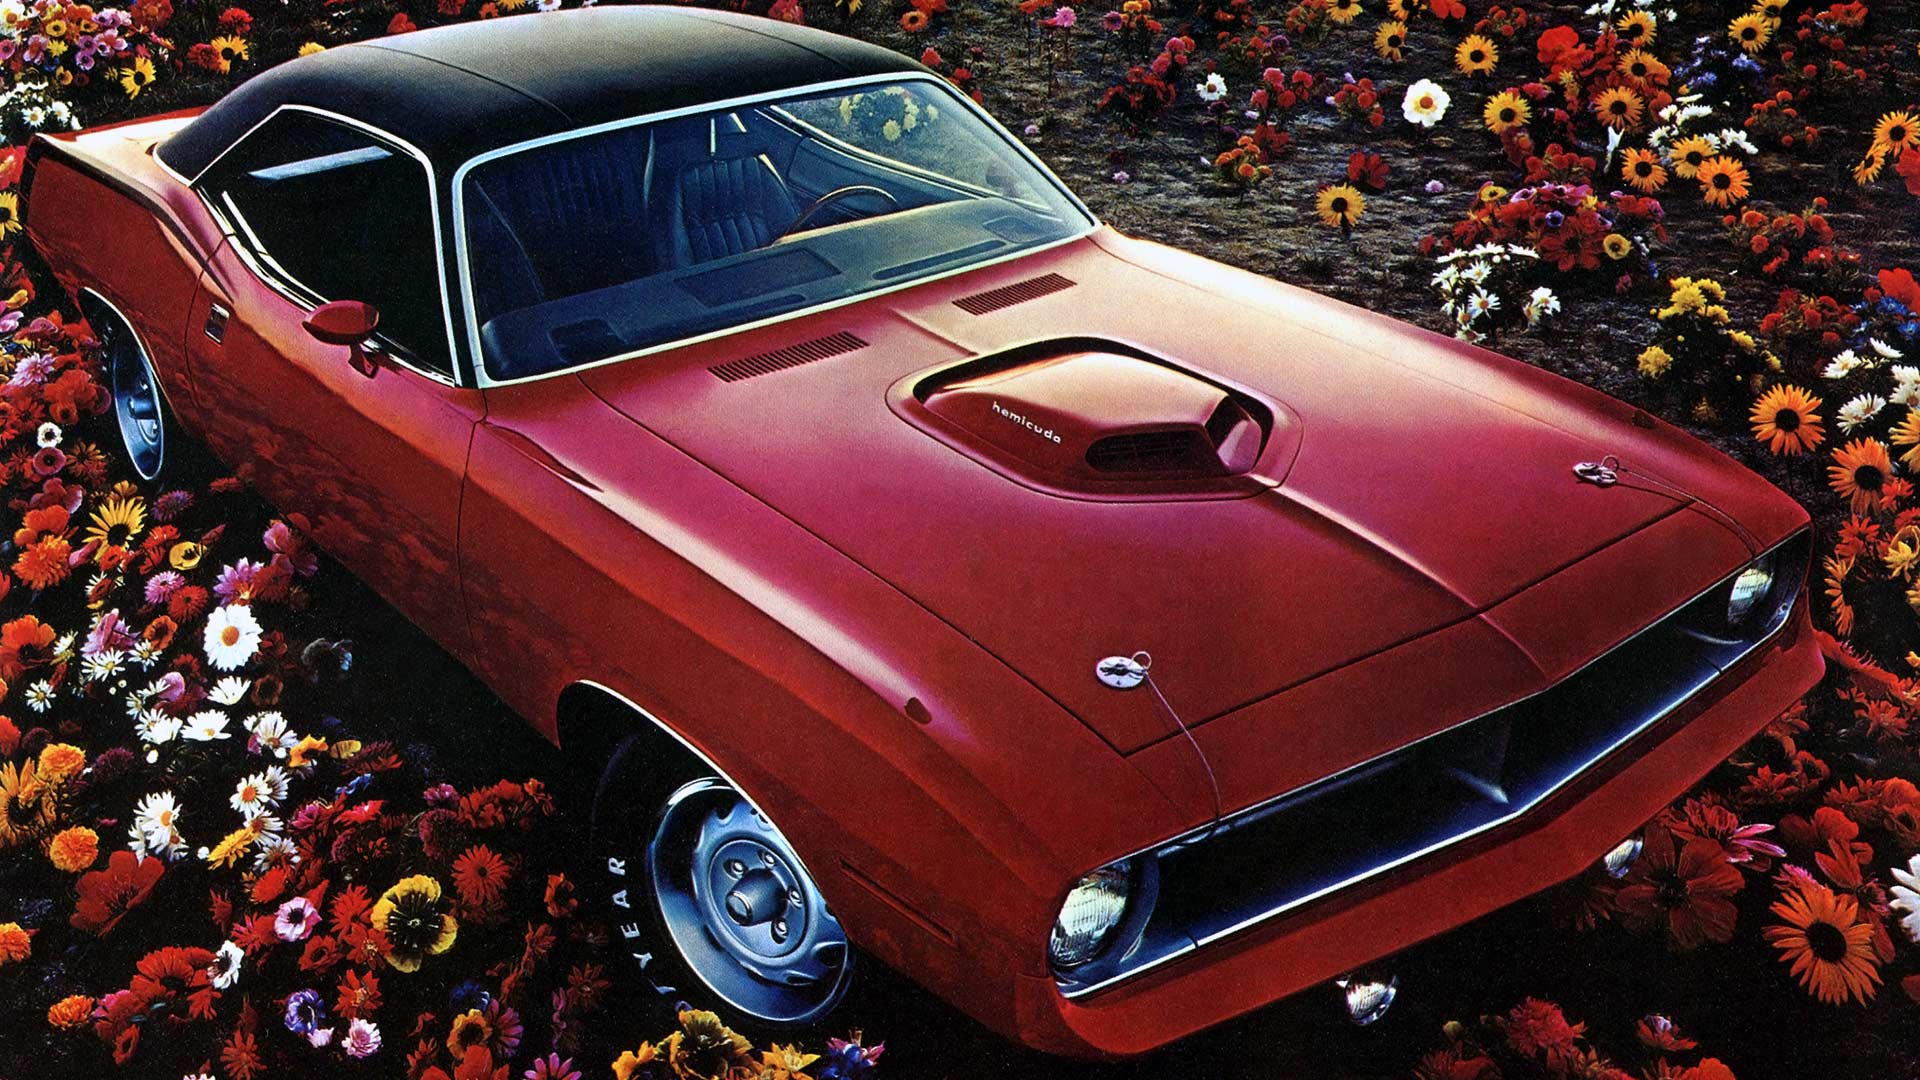 50 years of the Dodge Challenger